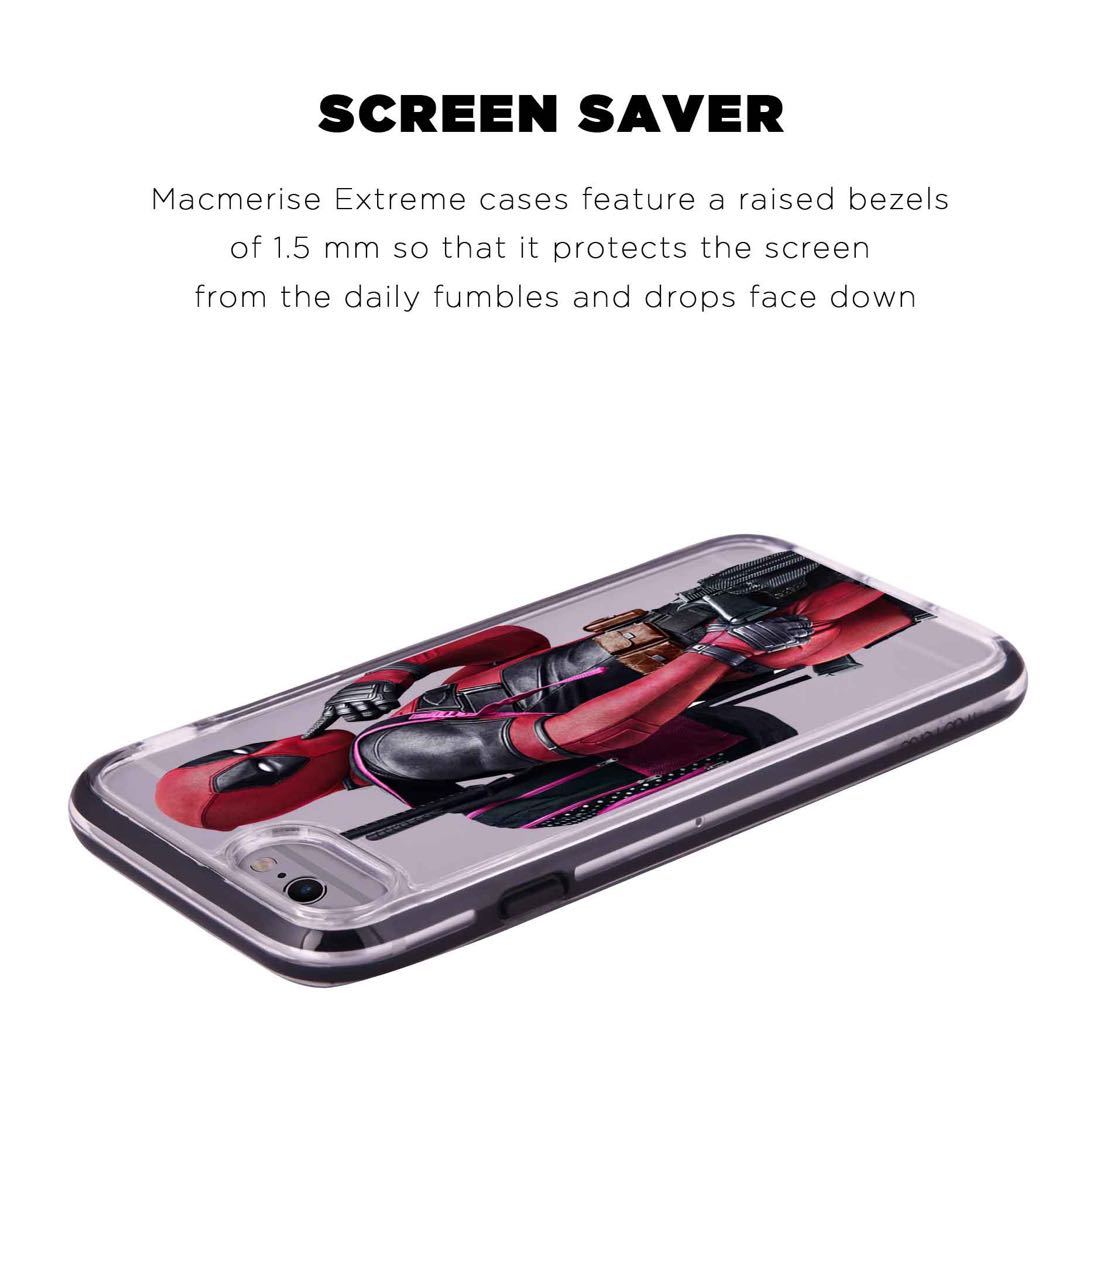 Smart Ass Deadpool - Extreme Phone Case for iPhone 6 Plus